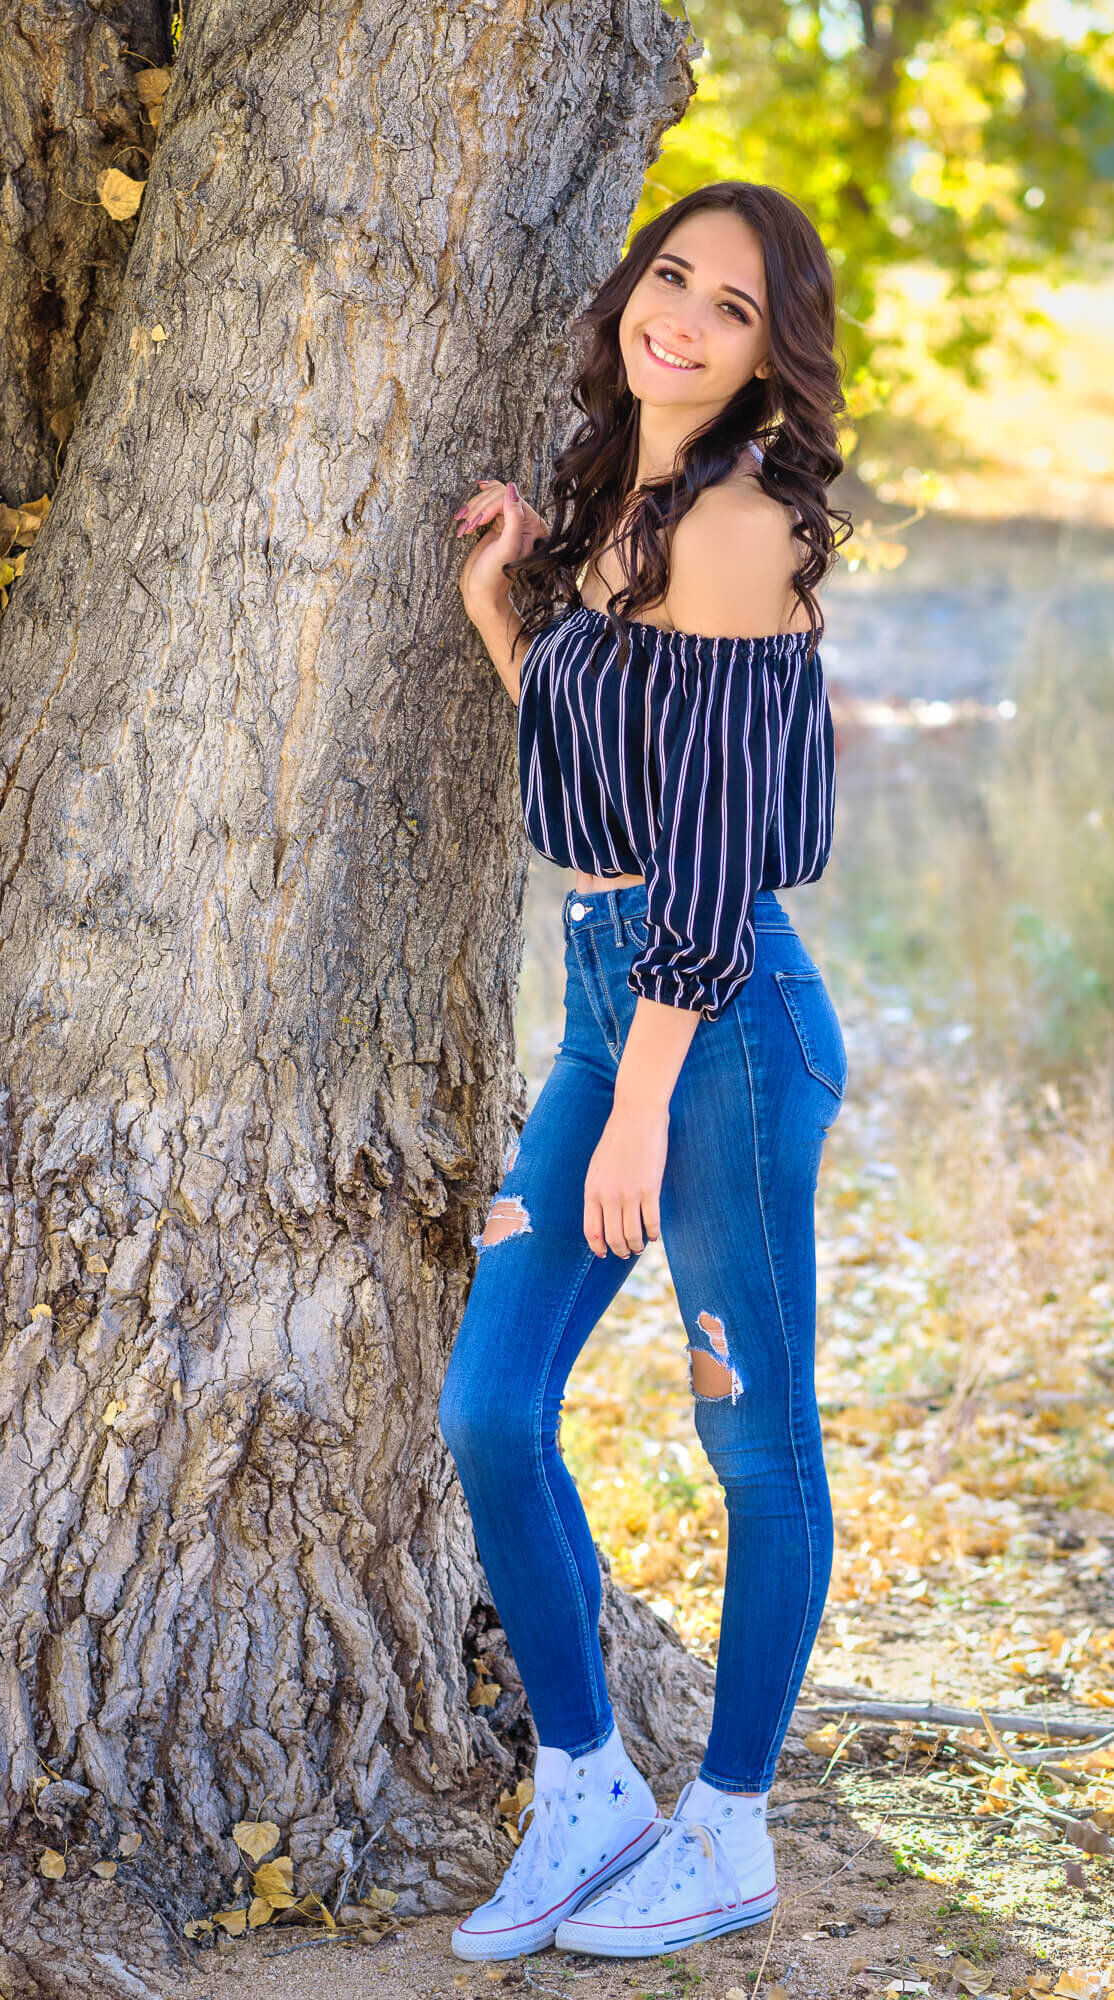 Willow Lake is a great spot for Prescott senior photos